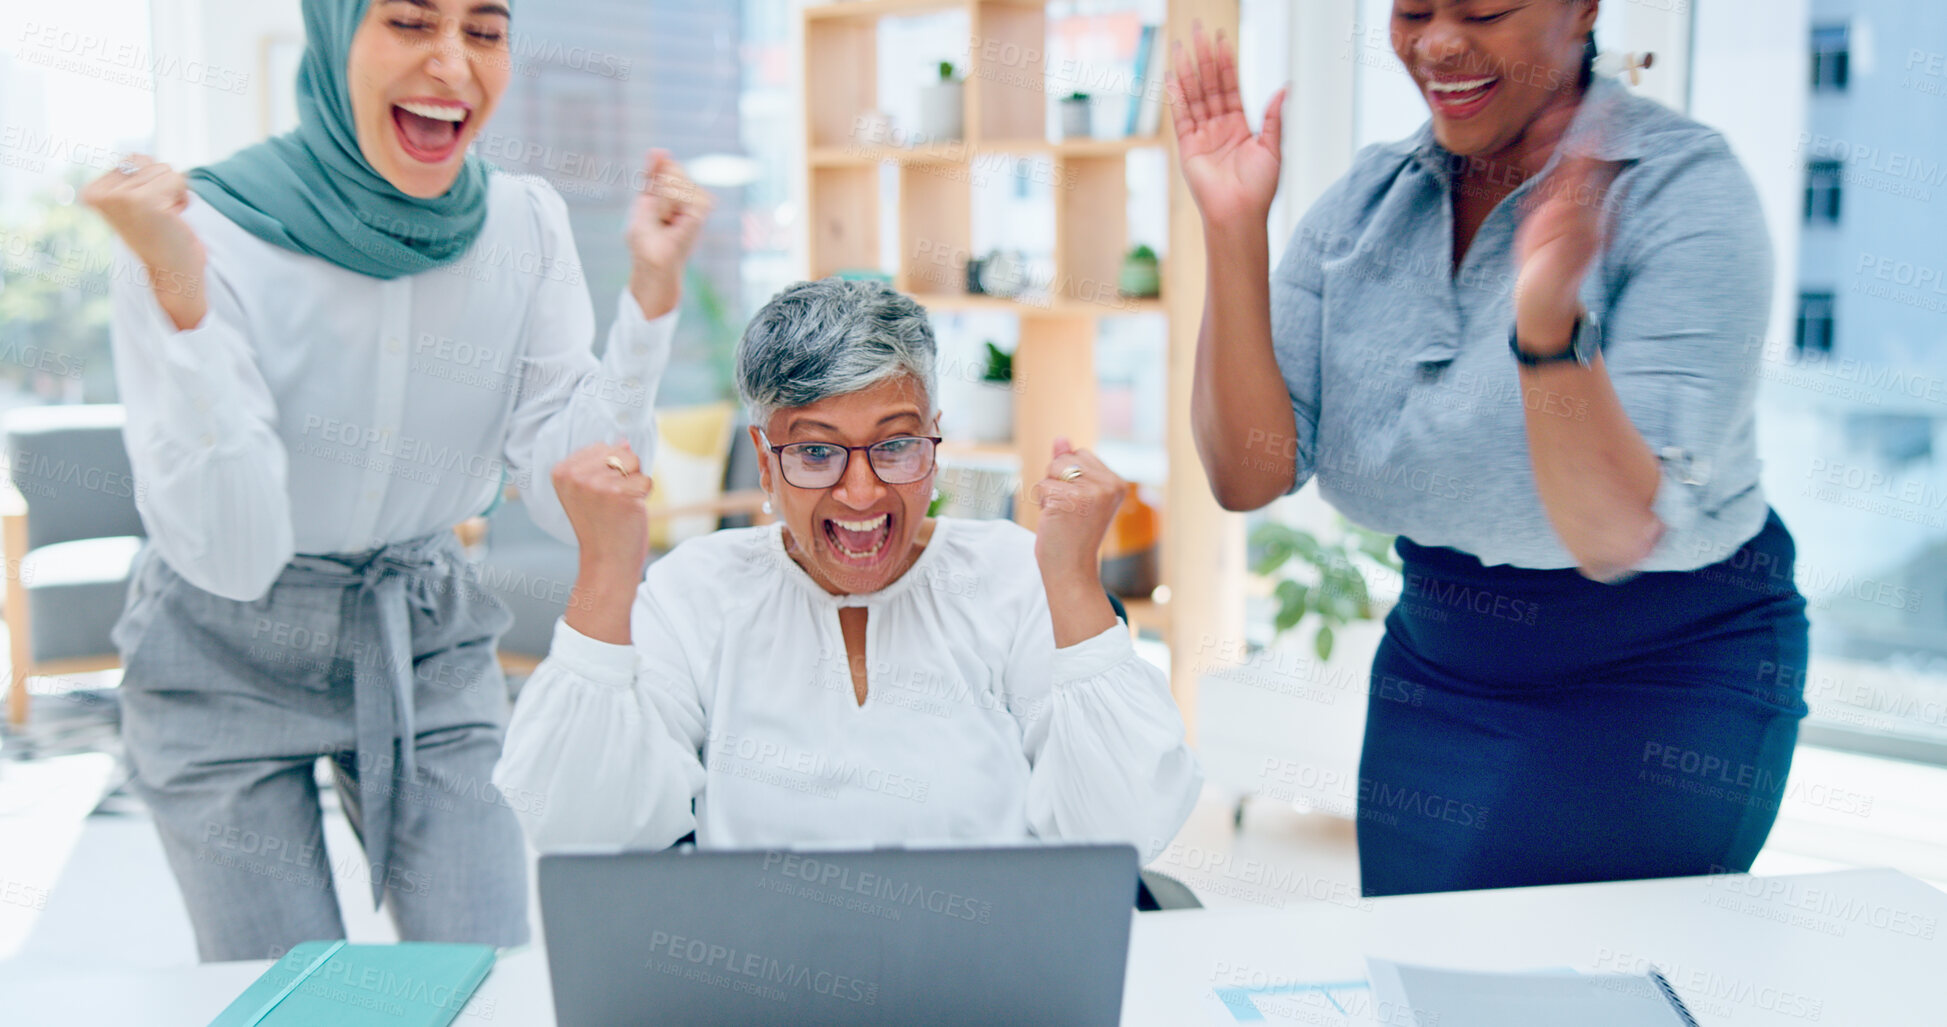 Buy stock photo Laptop, excited and business people scream, celebrate and cheers for promotion news, startup funding deal or revenue. Team feedback, teamwork success or office women celebration of winner achievement